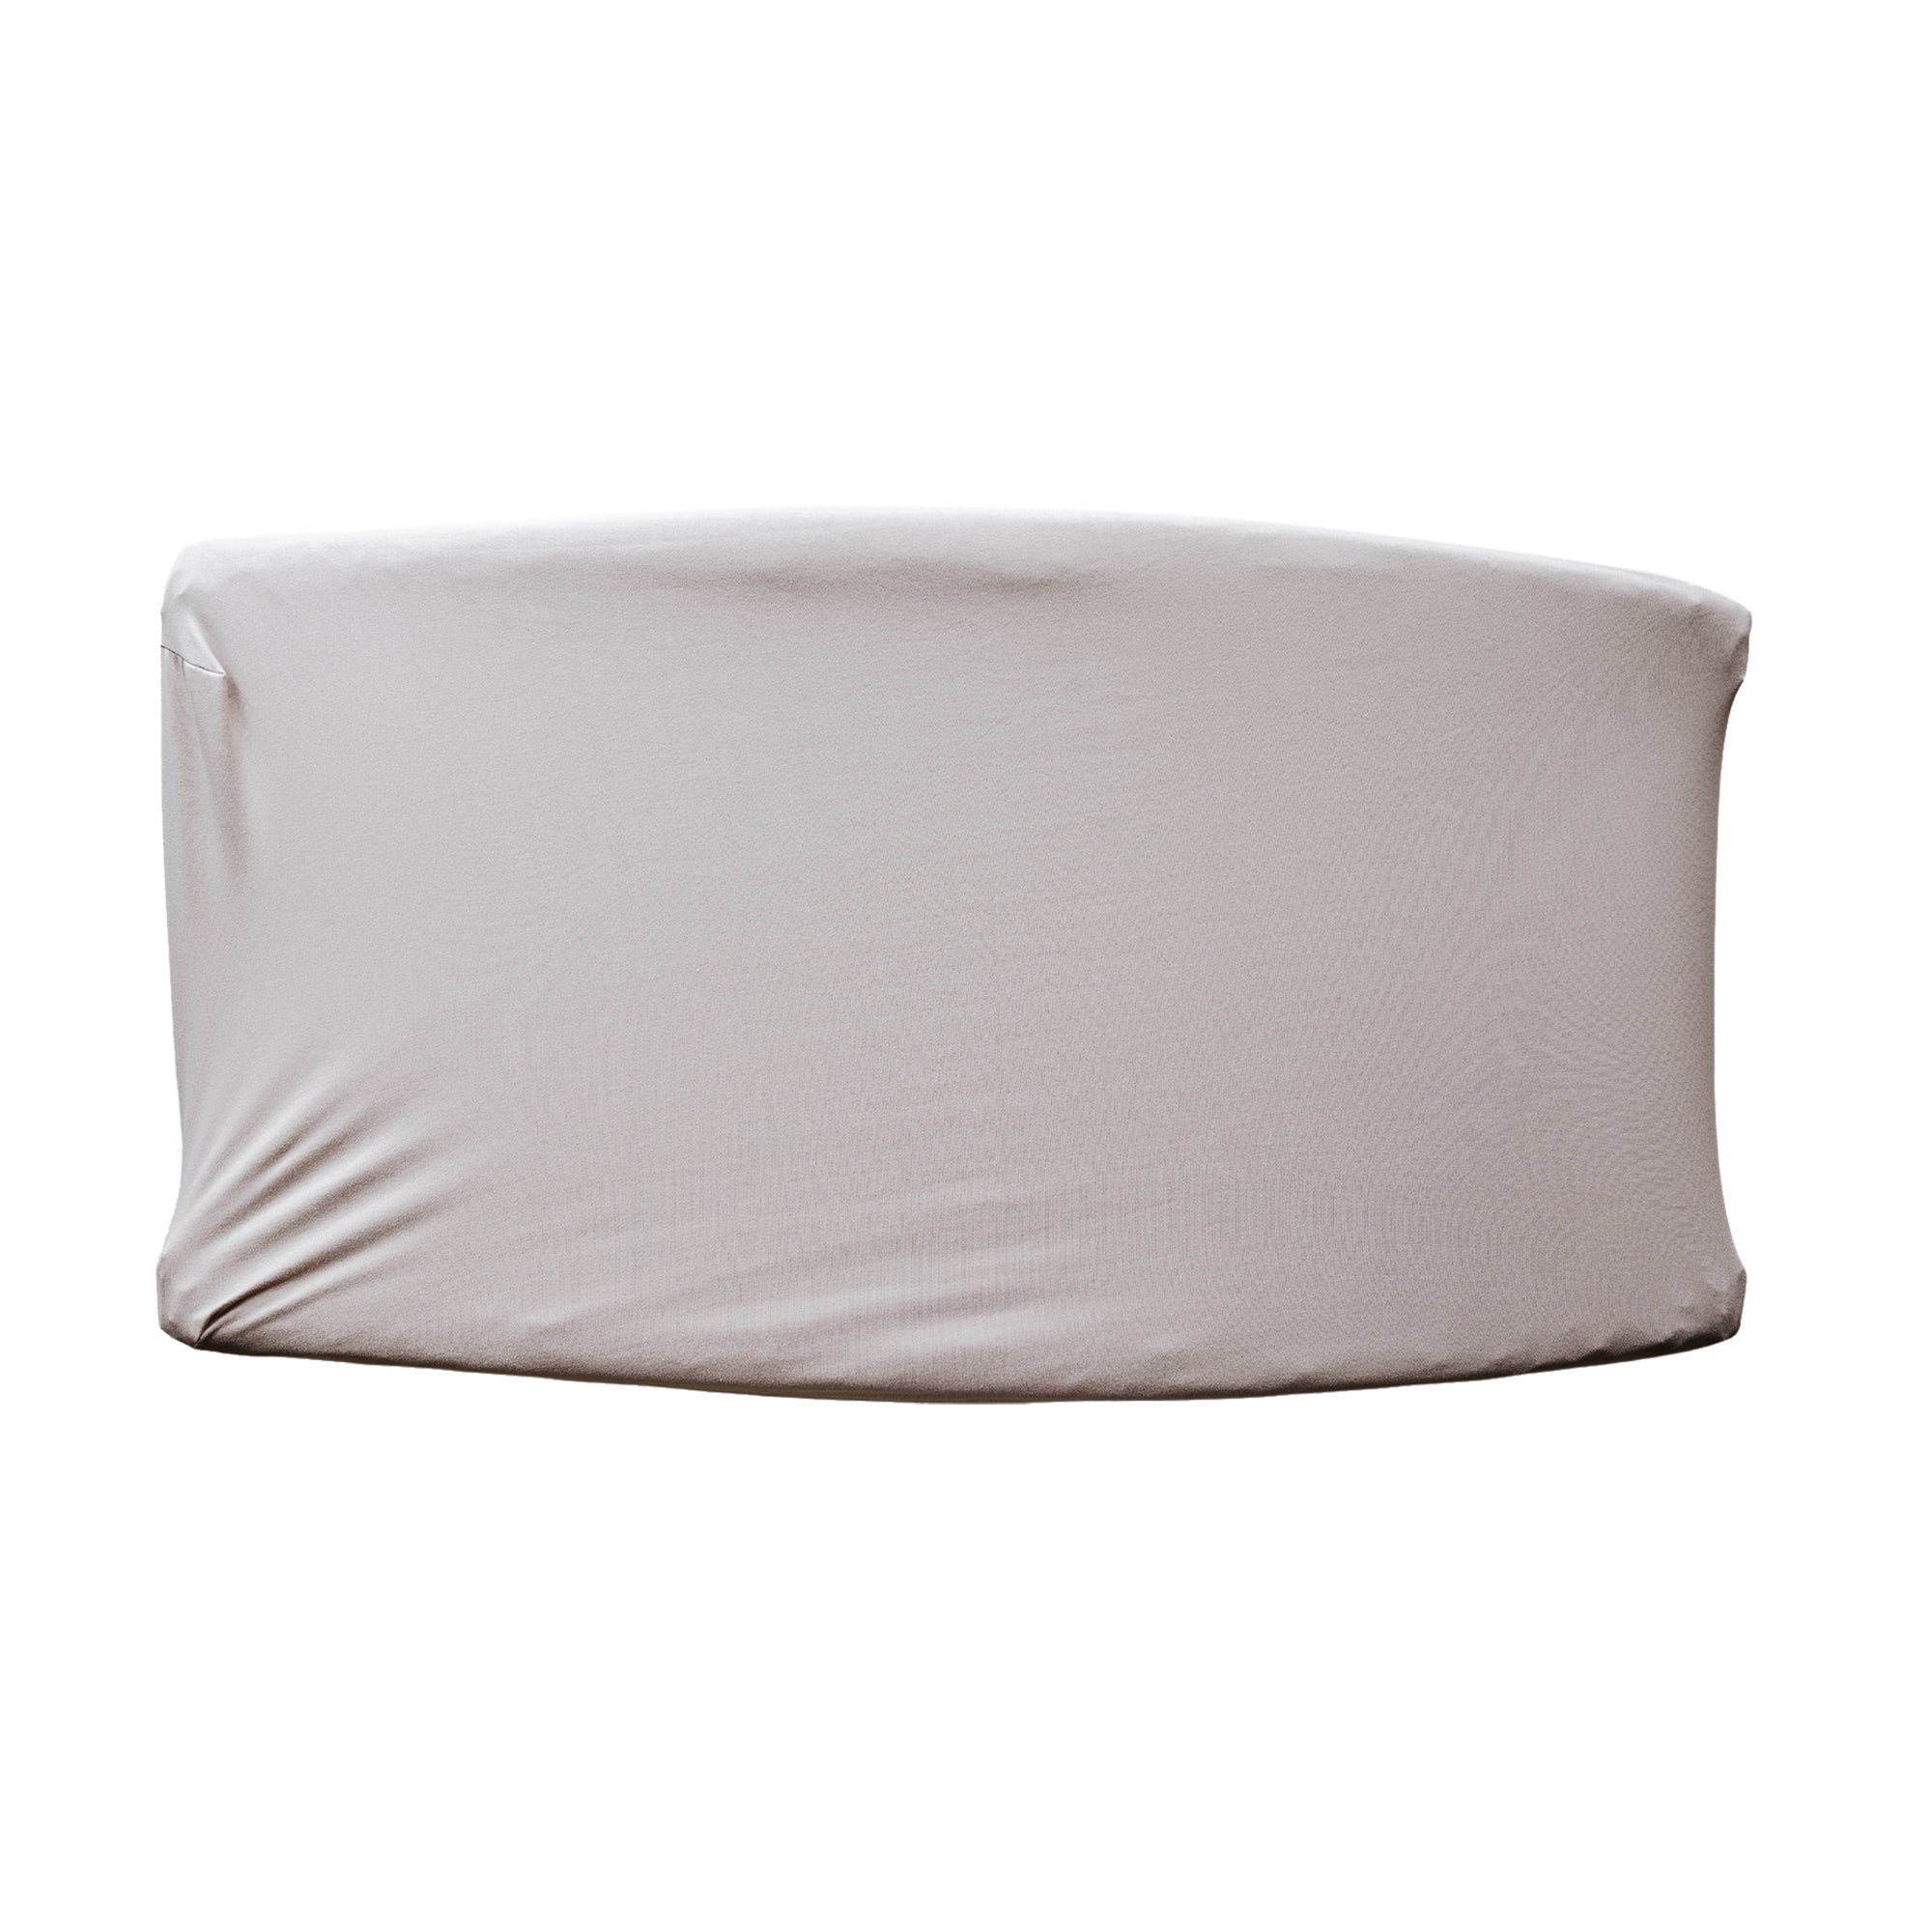 Changing Pad Cover | Barely Beige - LITTLEMISSDESSA